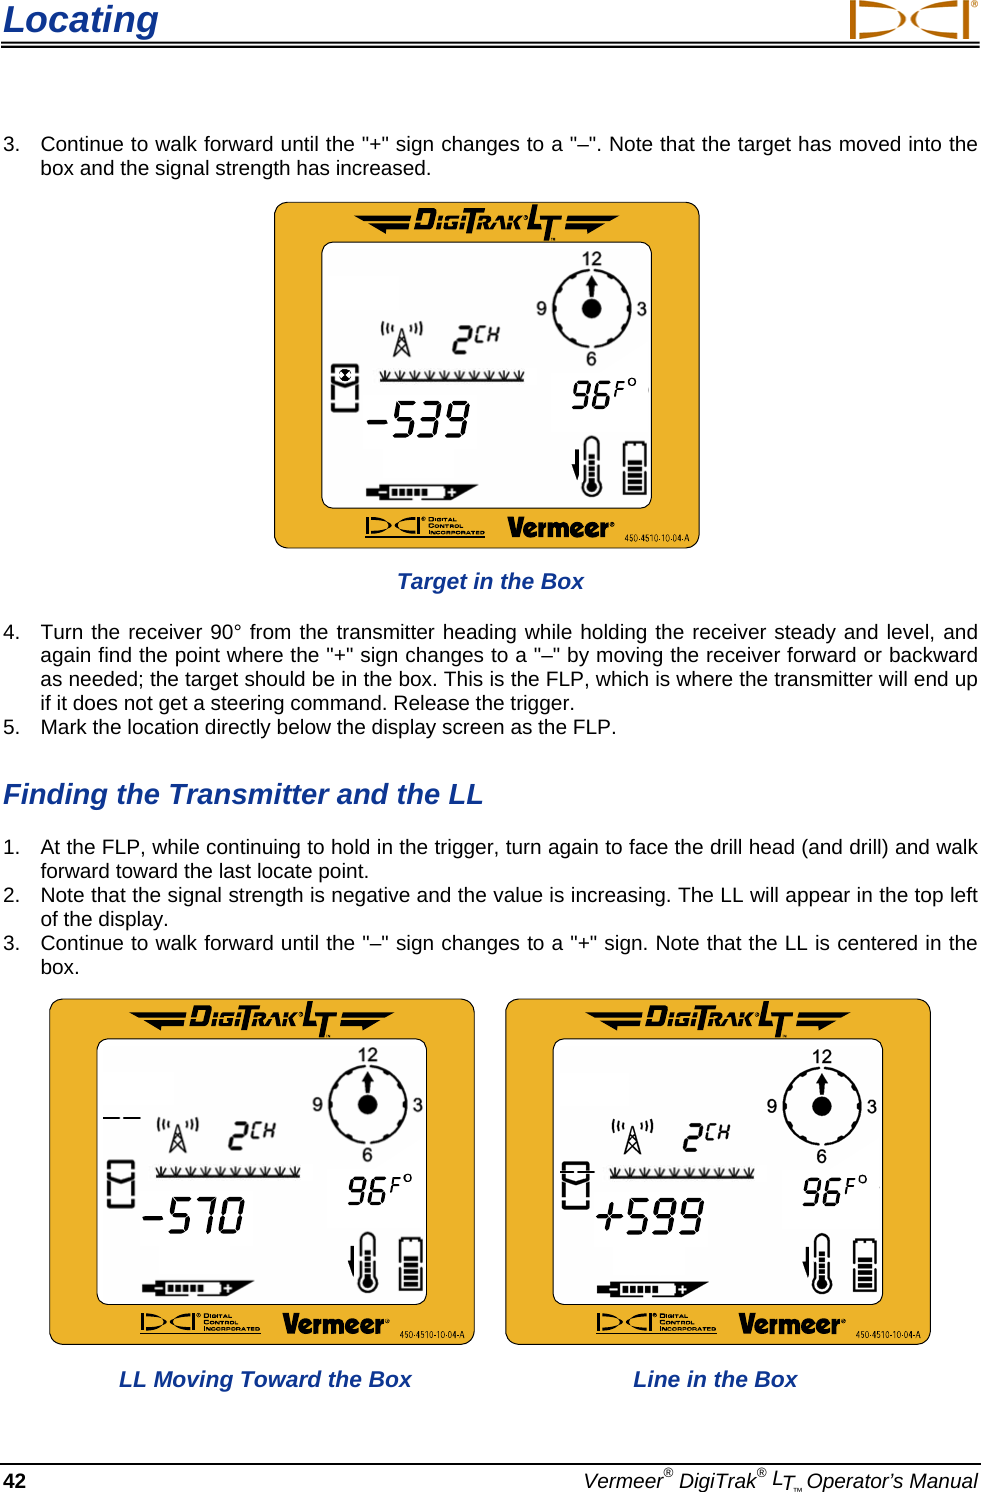 Locating     42  Vermeer® DigiTrak® LT™ Operator’s Manual 3.  Continue to walk forward until the &quot;+&quot; sign changes to a &quot;–&quot;. Note that the target has moved into the box and the signal strength has increased.   Target in the Box 4.  Turn the receiver 90° from the transmitter heading while holding the receiver steady and level, and again find the point where the &quot;+&quot; sign changes to a &quot;–&quot; by moving the receiver forward or backward as needed; the target should be in the box. This is the FLP, which is where the transmitter will end up if it does not get a steering command. Release the trigger. 5.  Mark the location directly below the display screen as the FLP. Finding the Transmitter and the LL 1.  At the FLP, while continuing to hold in the trigger, turn again to face the drill head (and drill) and walk forward toward the last locate point.   2.  Note that the signal strength is negative and the value is increasing. The LL will appear in the top left of the display. 3.  Continue to walk forward until the &quot;–&quot; sign changes to a &quot;+&quot; sign. Note that the LL is centered in the box.     LL Moving Toward the Box   Line in the Box 